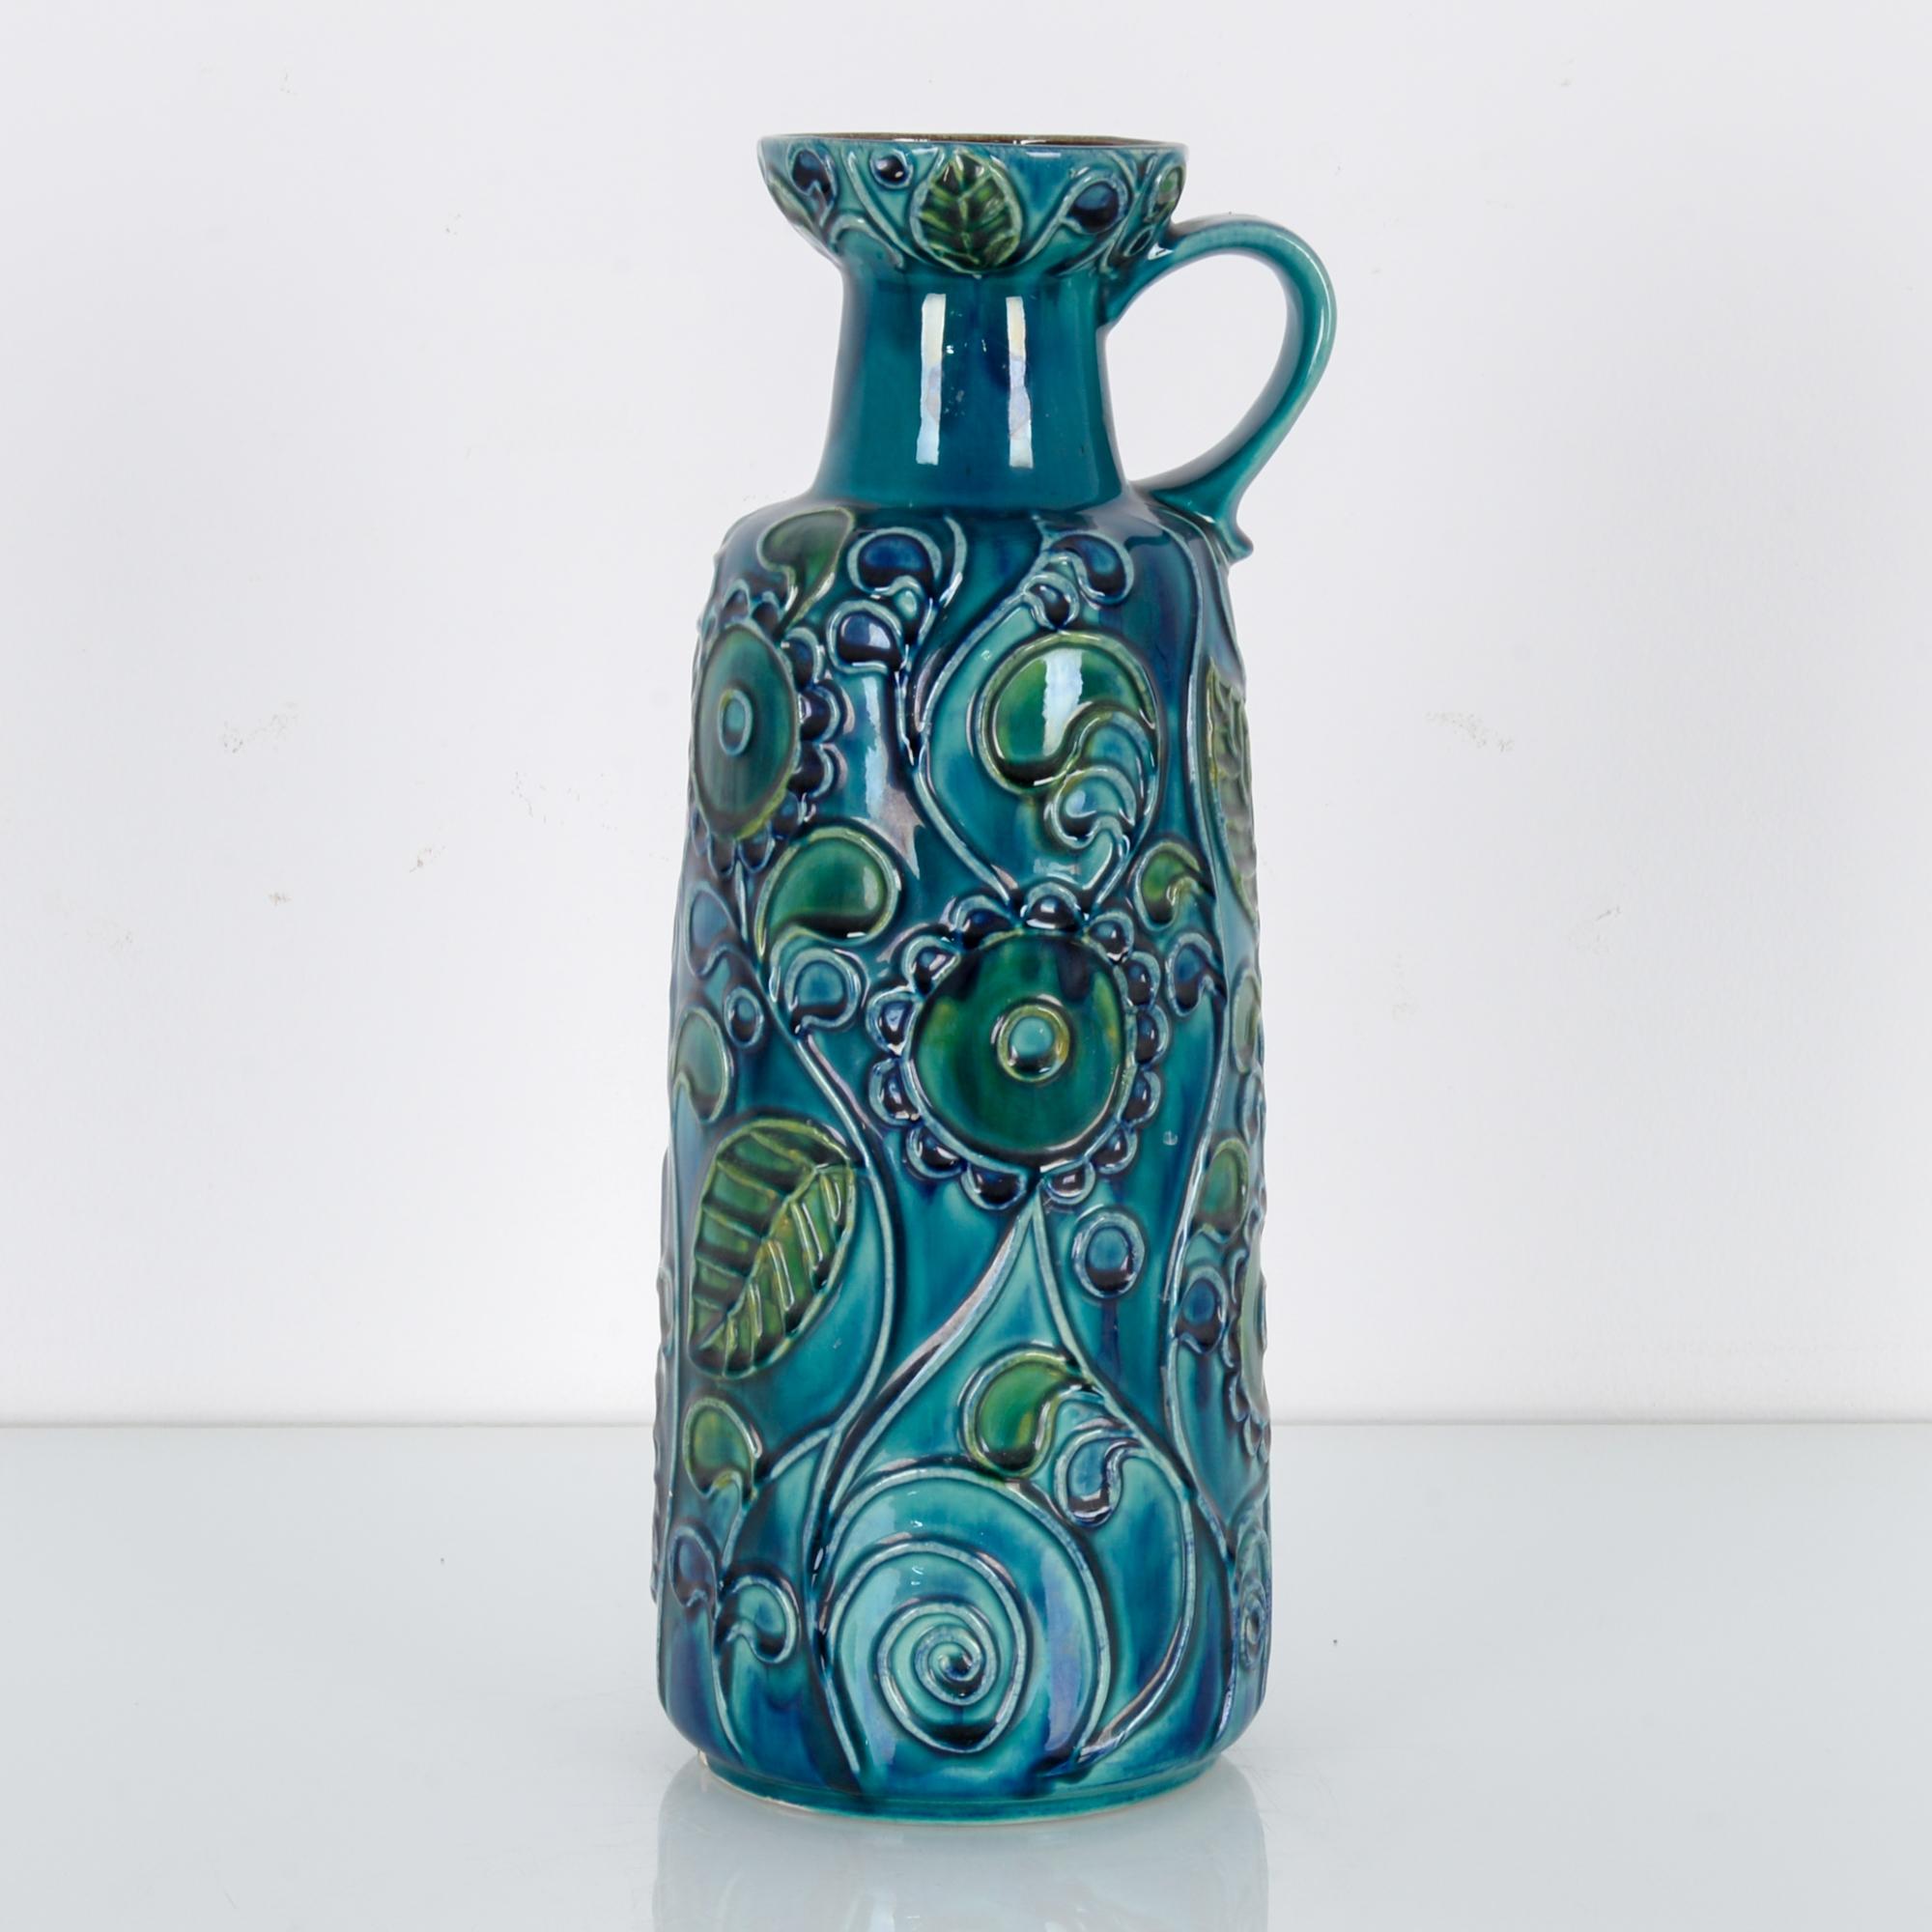 A blue ceramic vase produced by Bay Keramik in West Germany, circa 1950. This 45 cm patterned vase is glazed in a thick blue gradient, characteristic of the midcentury movement in West German ceramics. It seems to be flowing with its vegetative